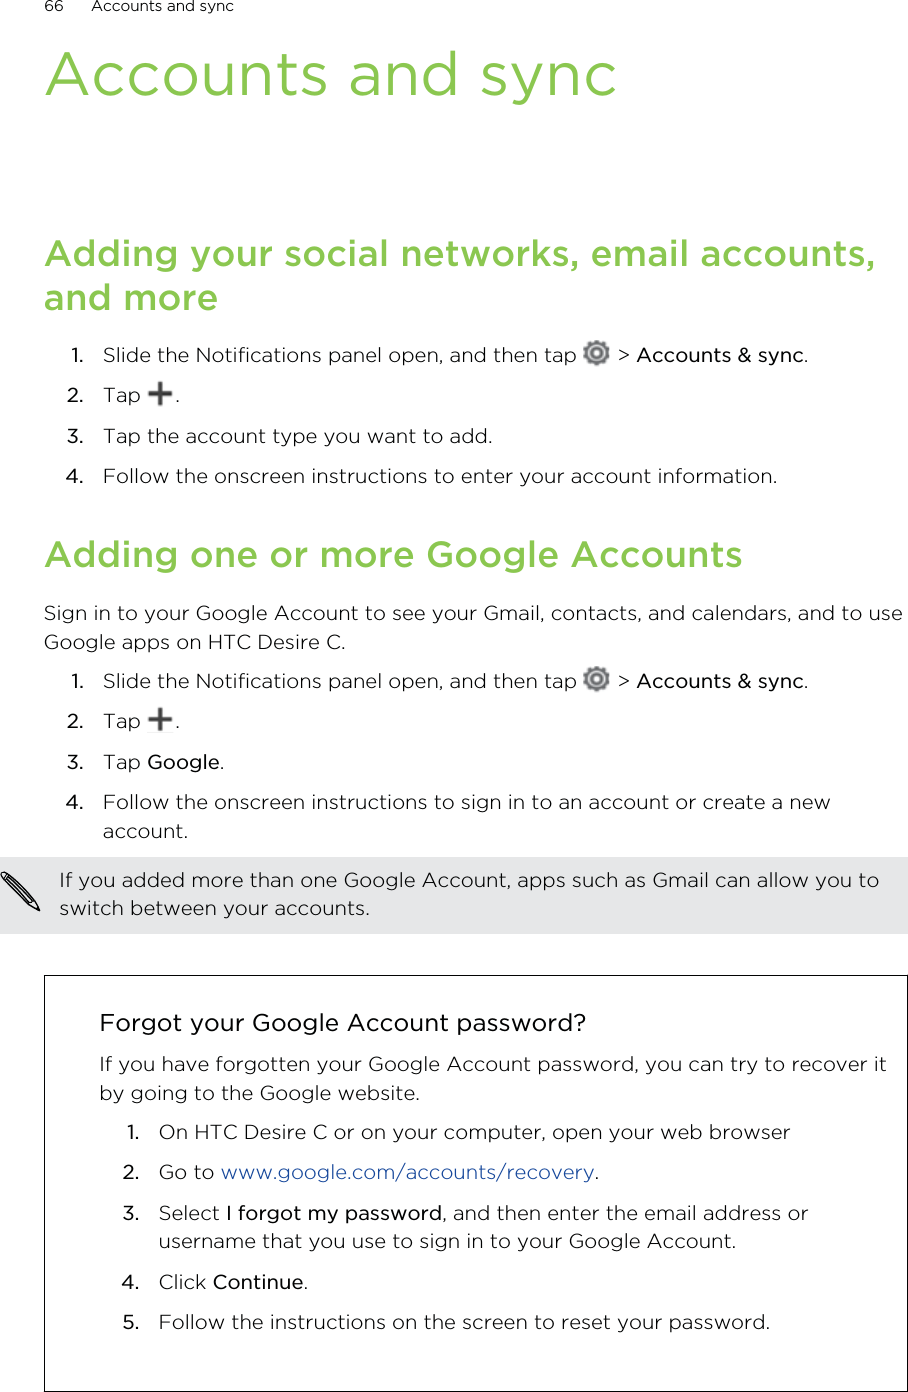 Accounts and syncAdding your social networks, email accounts,and more1. Slide the Notifications panel open, and then tap   &gt; Accounts &amp; sync.2. Tap  .3. Tap the account type you want to add.4. Follow the onscreen instructions to enter your account information.Adding one or more Google AccountsSign in to your Google Account to see your Gmail, contacts, and calendars, and to useGoogle apps on HTC Desire C.1. Slide the Notifications panel open, and then tap   &gt; Accounts &amp; sync.2. Tap  .3. Tap Google.4. Follow the onscreen instructions to sign in to an account or create a newaccount.If you added more than one Google Account, apps such as Gmail can allow you toswitch between your accounts.Forgot your Google Account password?If you have forgotten your Google Account password, you can try to recover itby going to the Google website.1. On HTC Desire C or on your computer, open your web browser2. Go to www.google.com/accounts/recovery.3. Select I forgot my password, and then enter the email address orusername that you use to sign in to your Google Account.4. Click Continue.5. Follow the instructions on the screen to reset your password.66 Accounts and sync